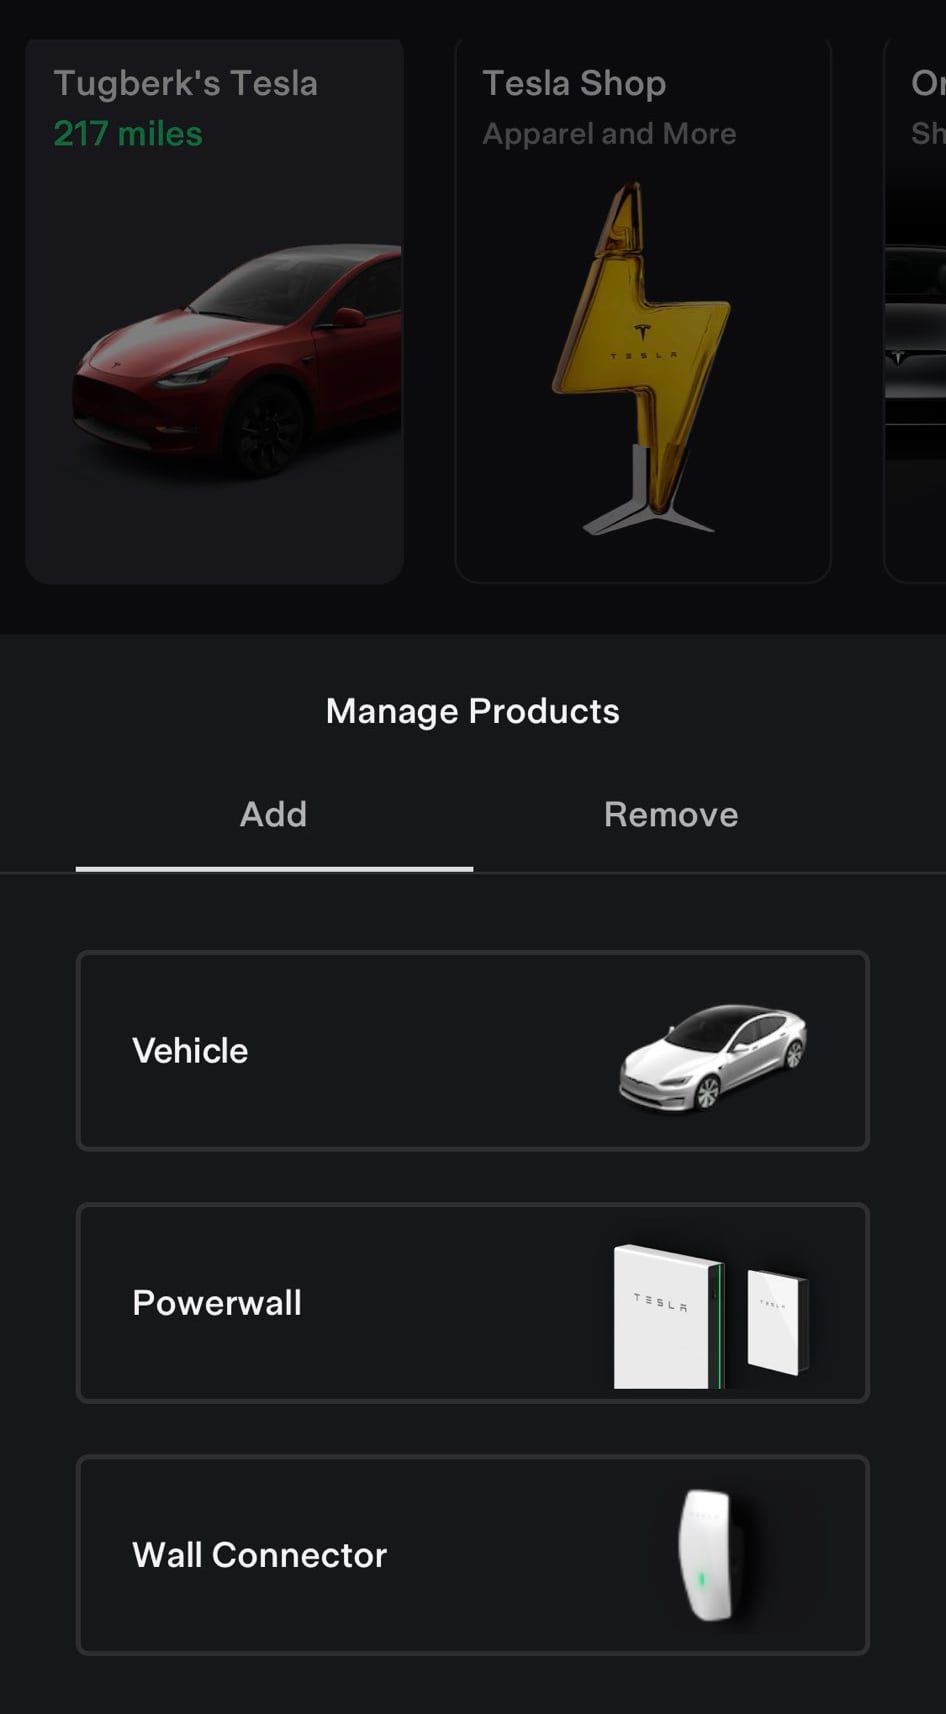 Tesla lets you connect your Wall Connector to the app